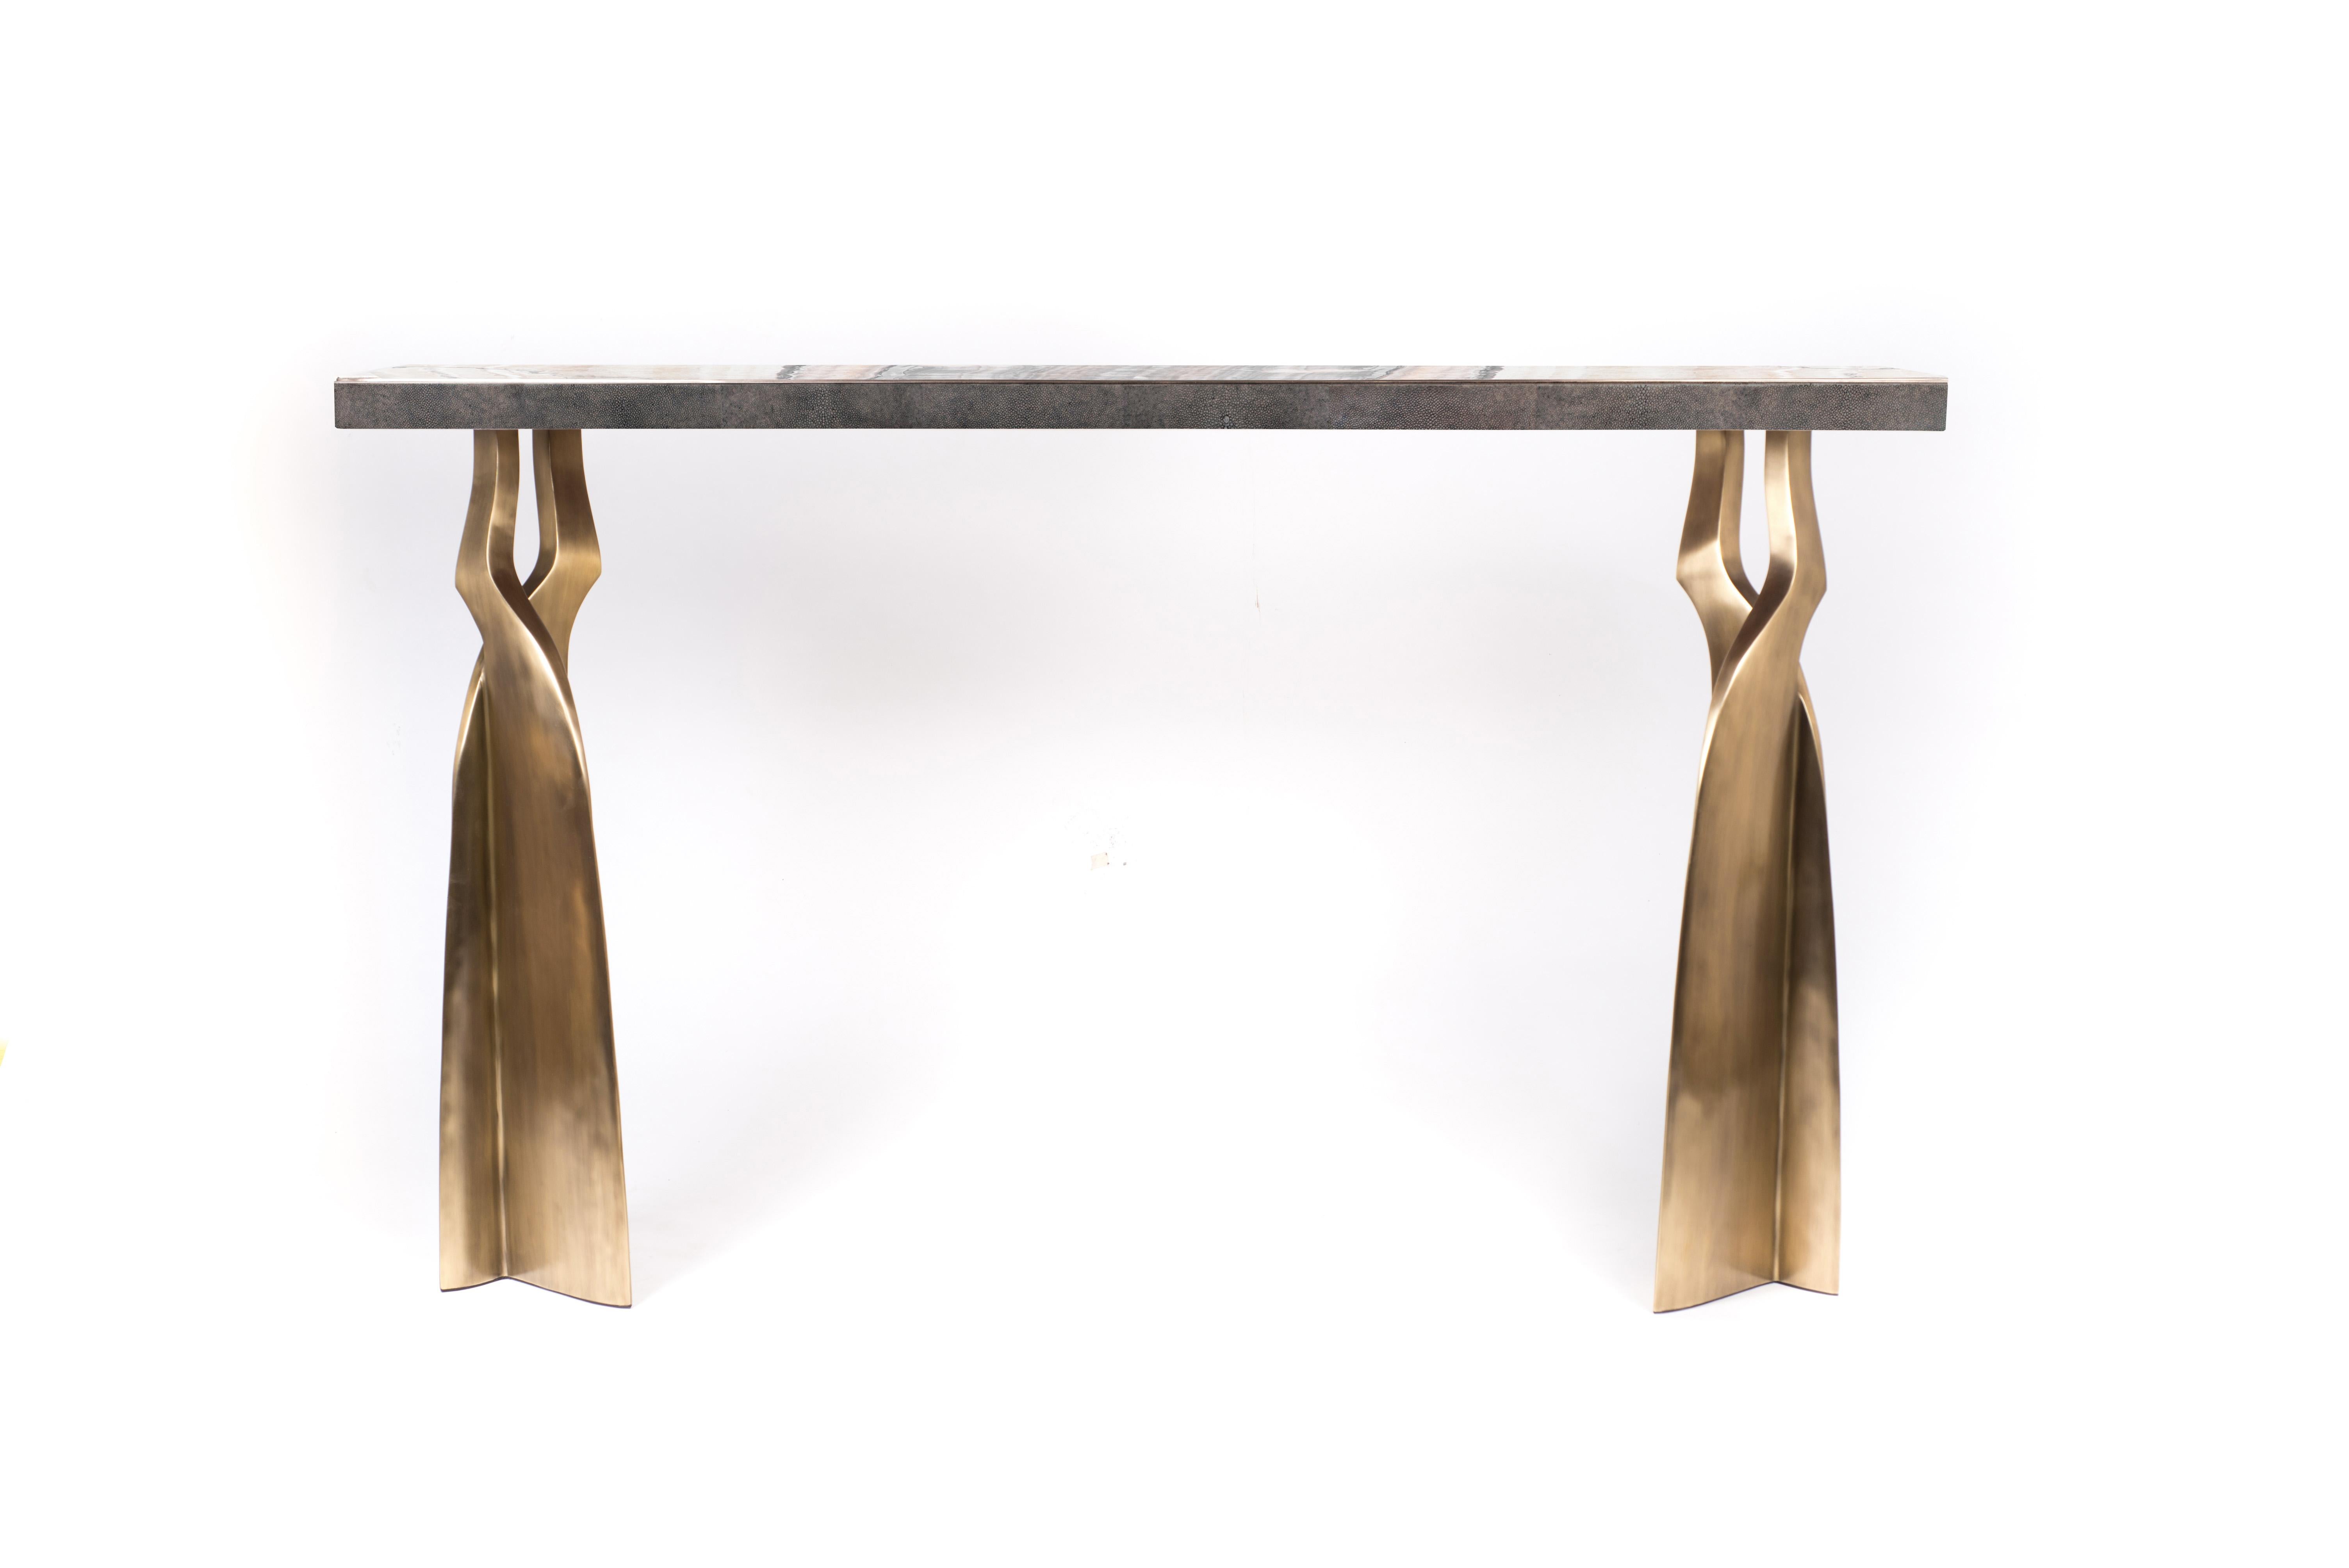 The Chital console table is both dramatic and organic it’s unique design. The onyx inlaid top, with its side borders inlaid in coal black shagreen, sits on a pair of ethereal and sculptural bronze-patina brass legs. This piece is designed by Kifu